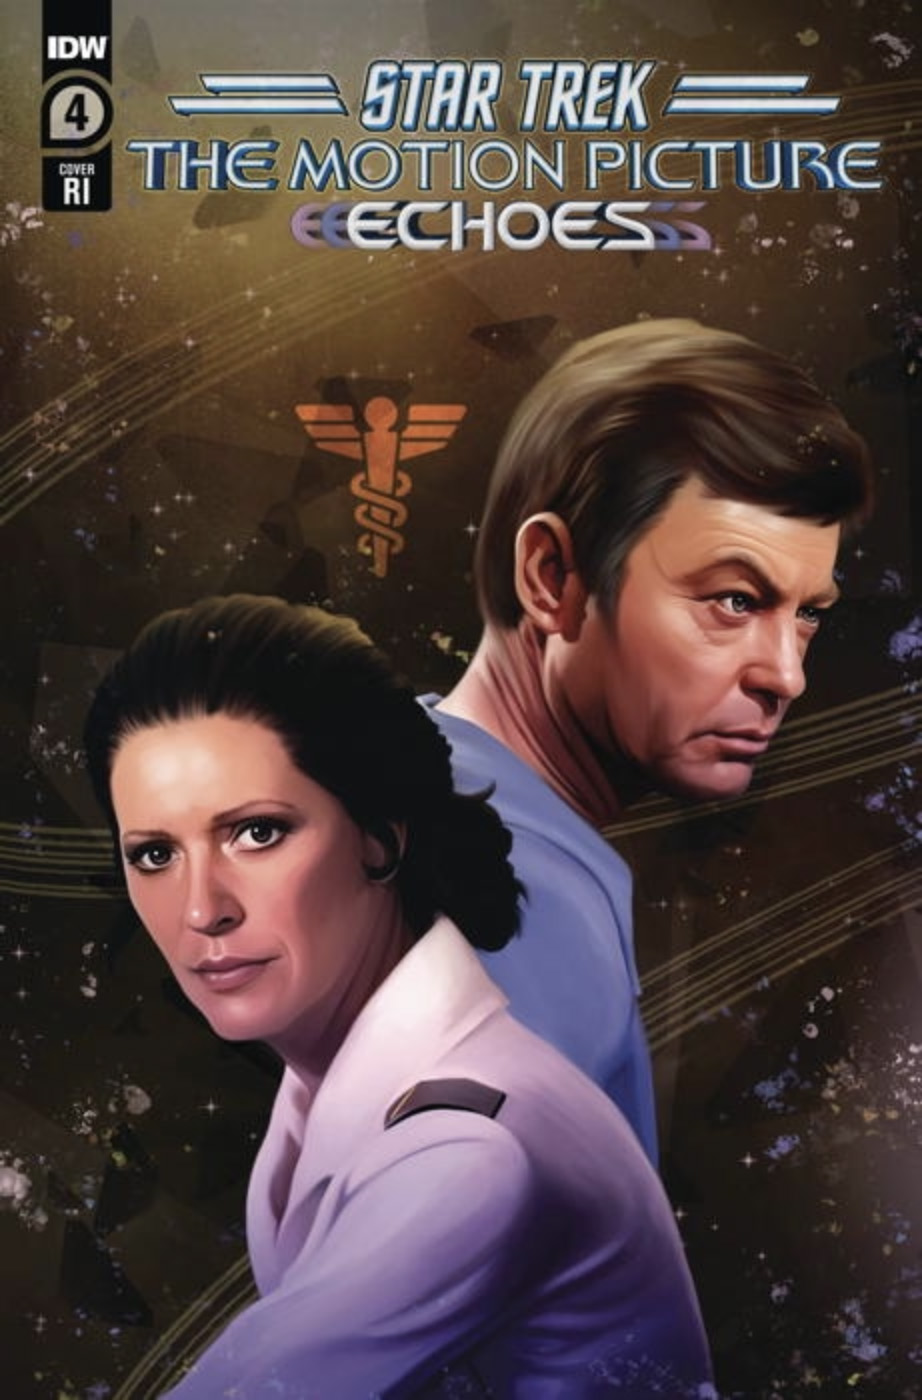 IDW Star Trek: The Motion Picture - Echoes 4RIA